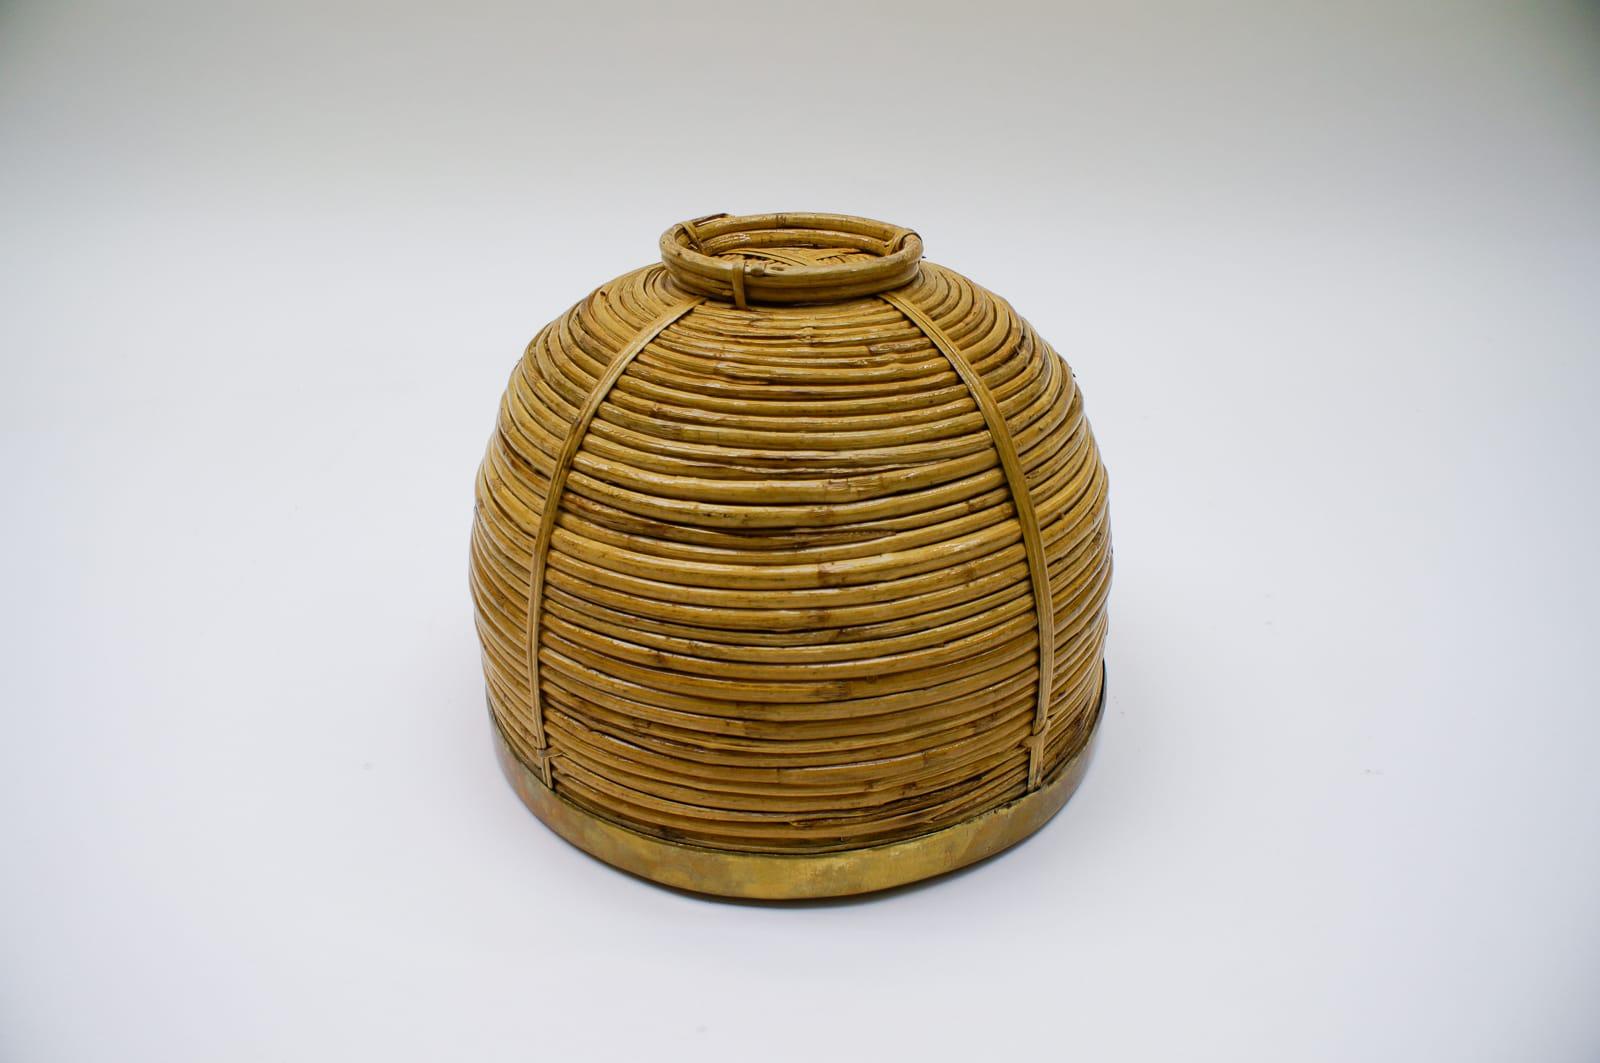 Large Rattan and Brass Midcentury Handcrafted Bowl, Austria, 1950s For Sale 6